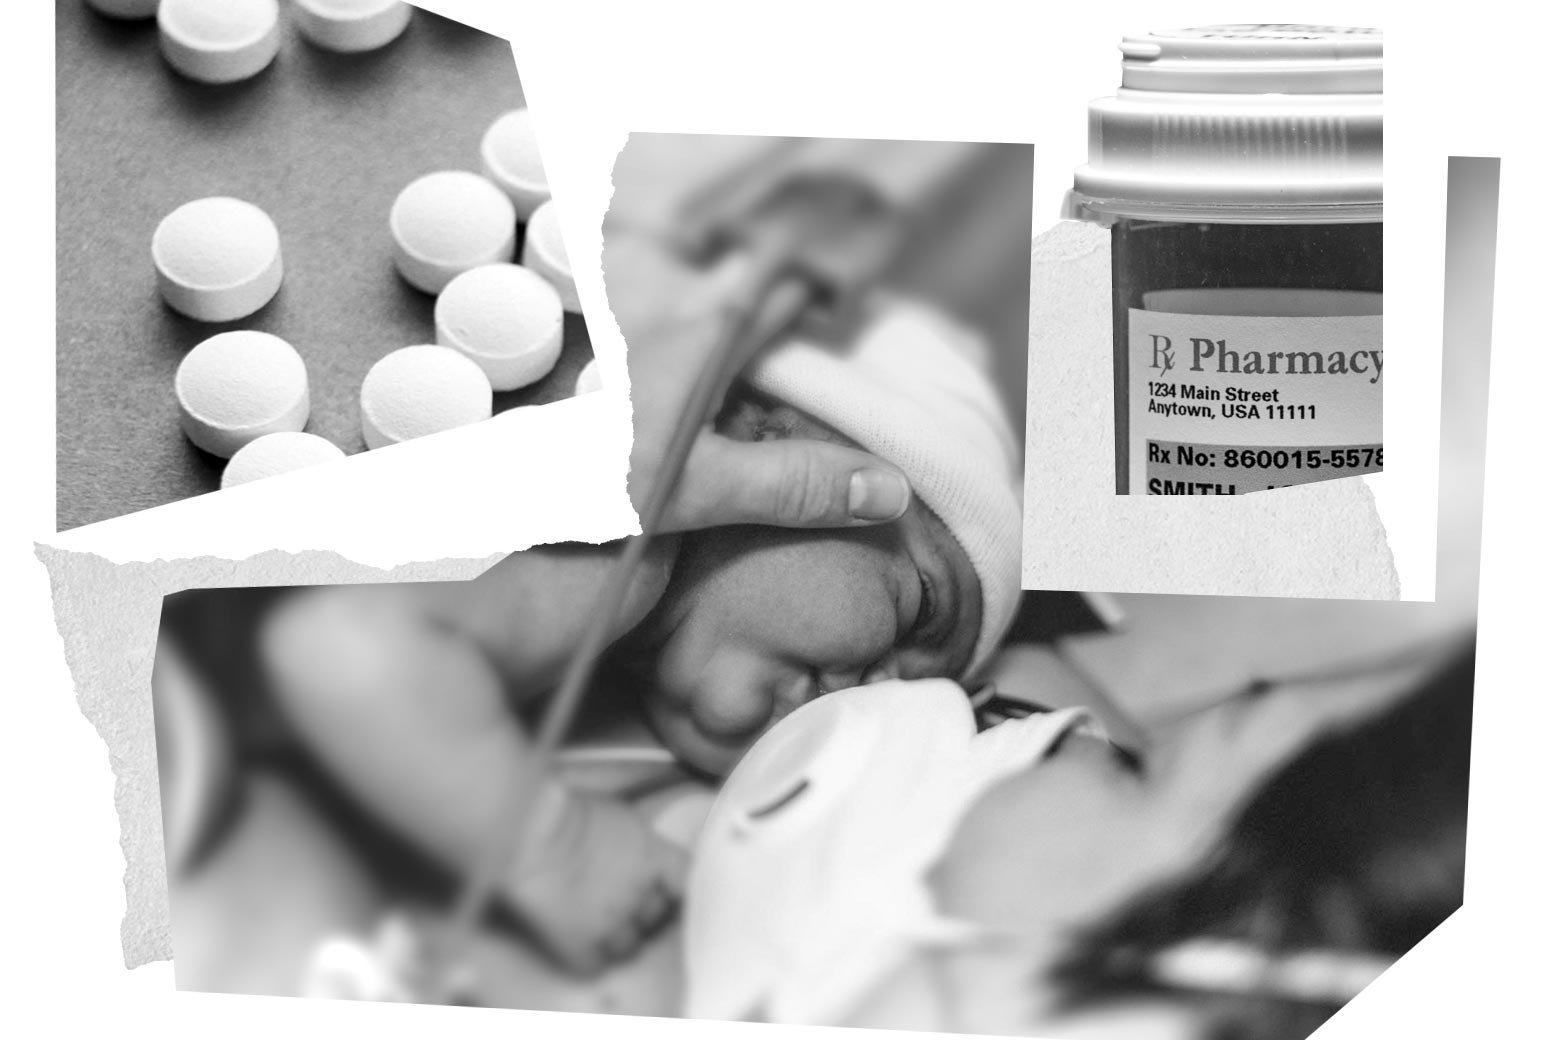 Collage of mom with newborn in a hospital room, pills, and a prescription pill container